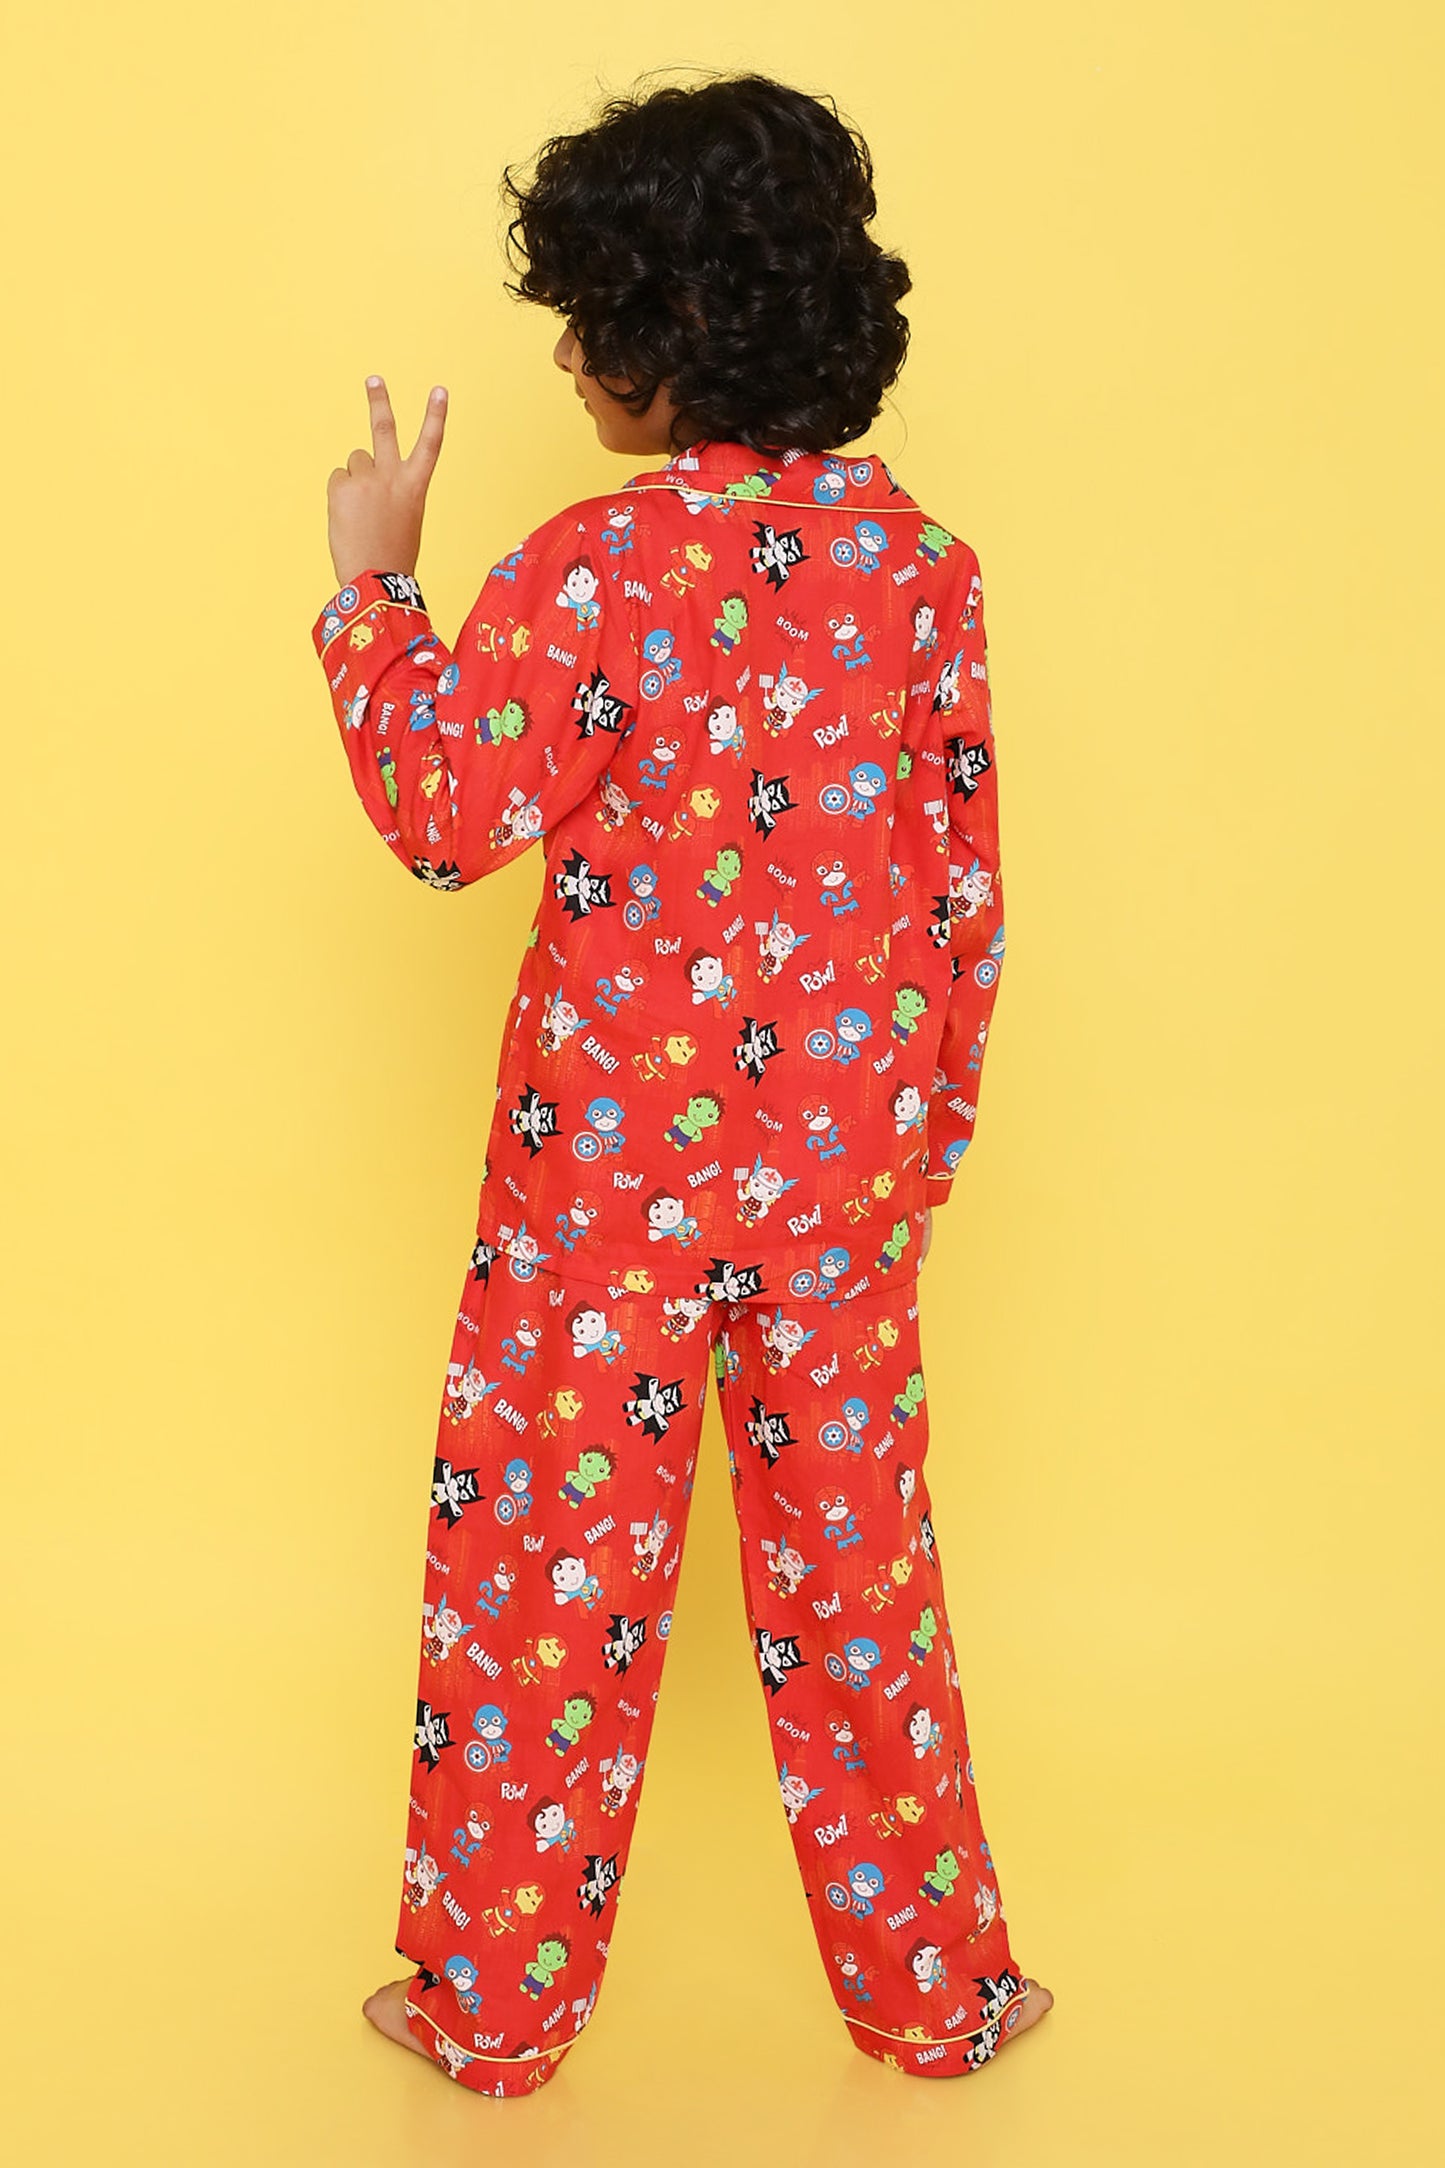 Knitting Doodles Premium cotton Kids' Notched Collar Night suit in adorable superheroes  Print- Red